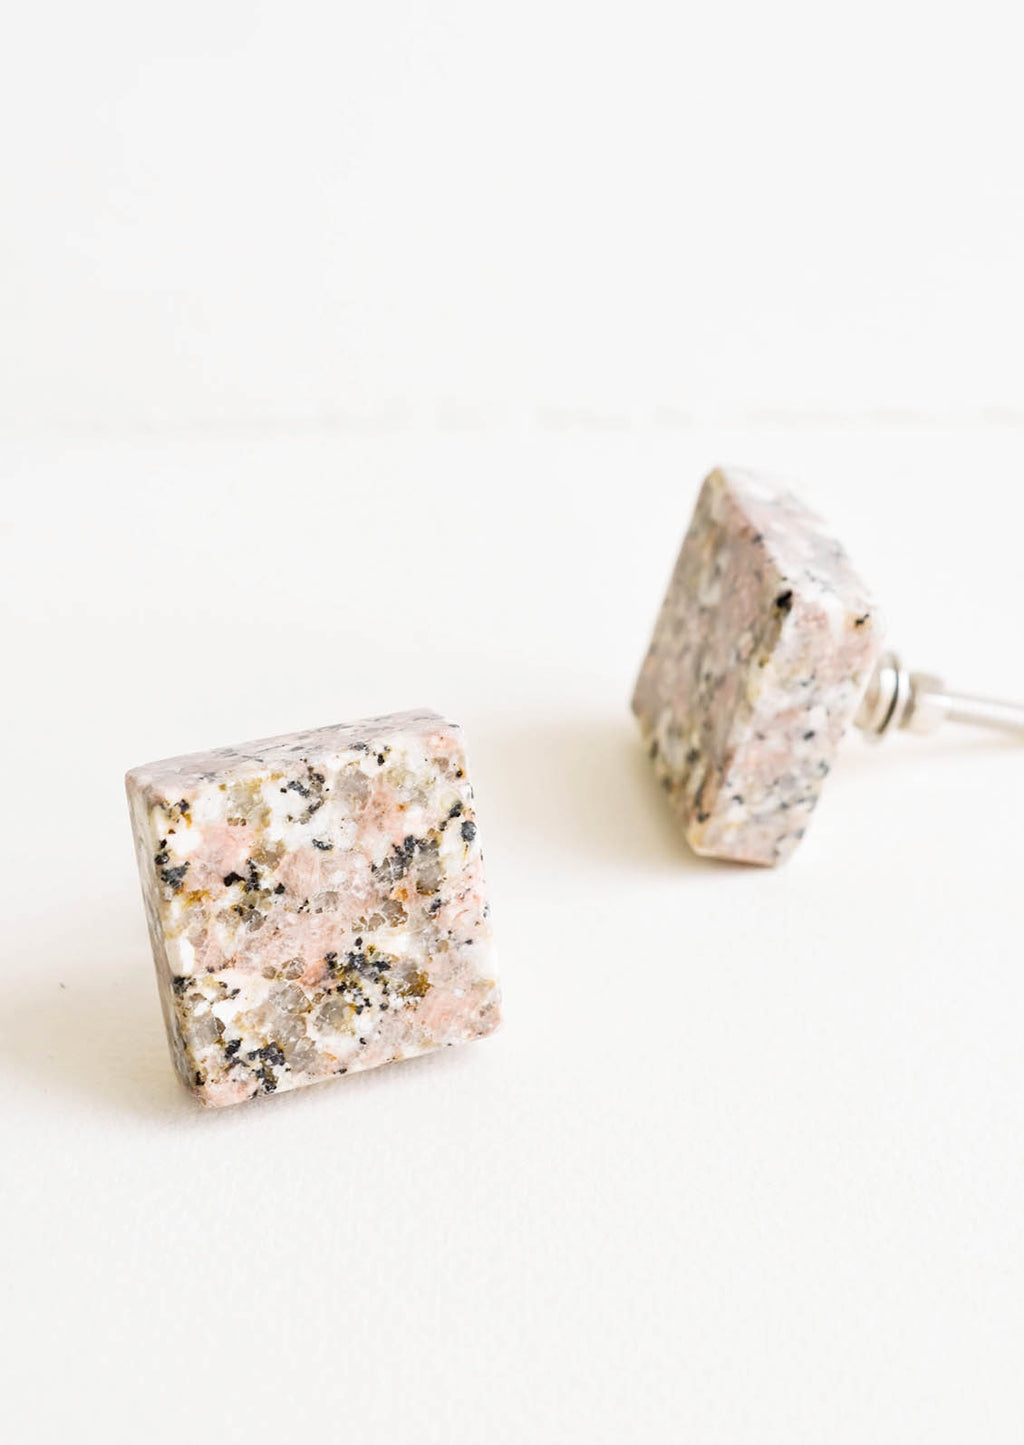 Pink Multi: Square stone knob with natural shades of pink, grey and white